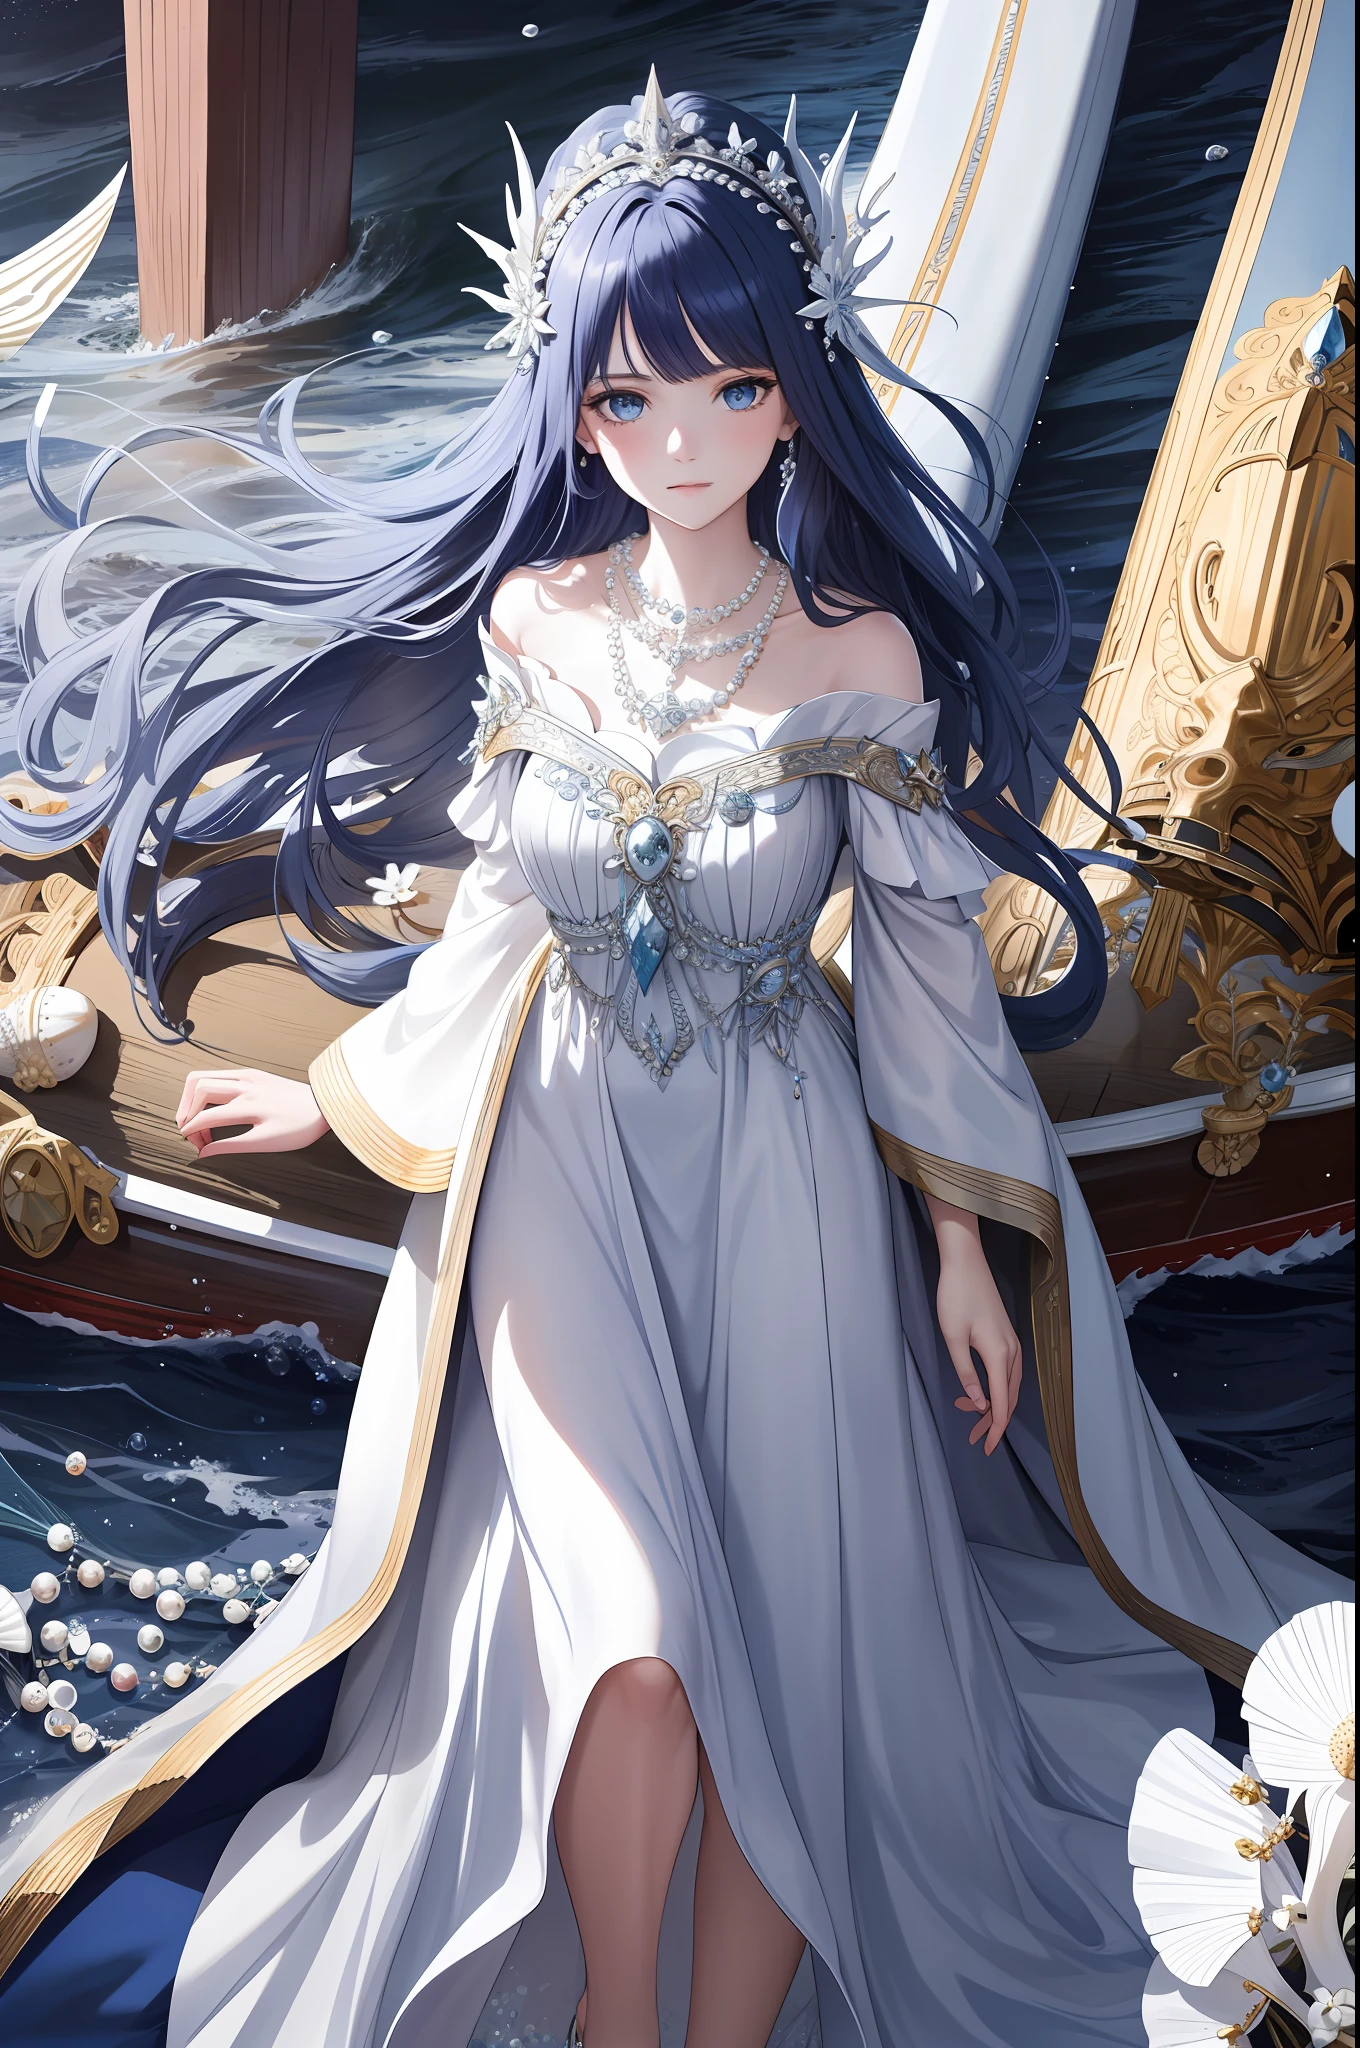 Maiden, alone, long navy blue hair, blue eyes, dress, necklace, pearl, shell, waves, ocean, sea, fish, boat, hyperdetail, best picture quality, white crown, masterpiece, superlative, headdress, hair ornament, intricate details, off-the-shoulder, fairy of the gods